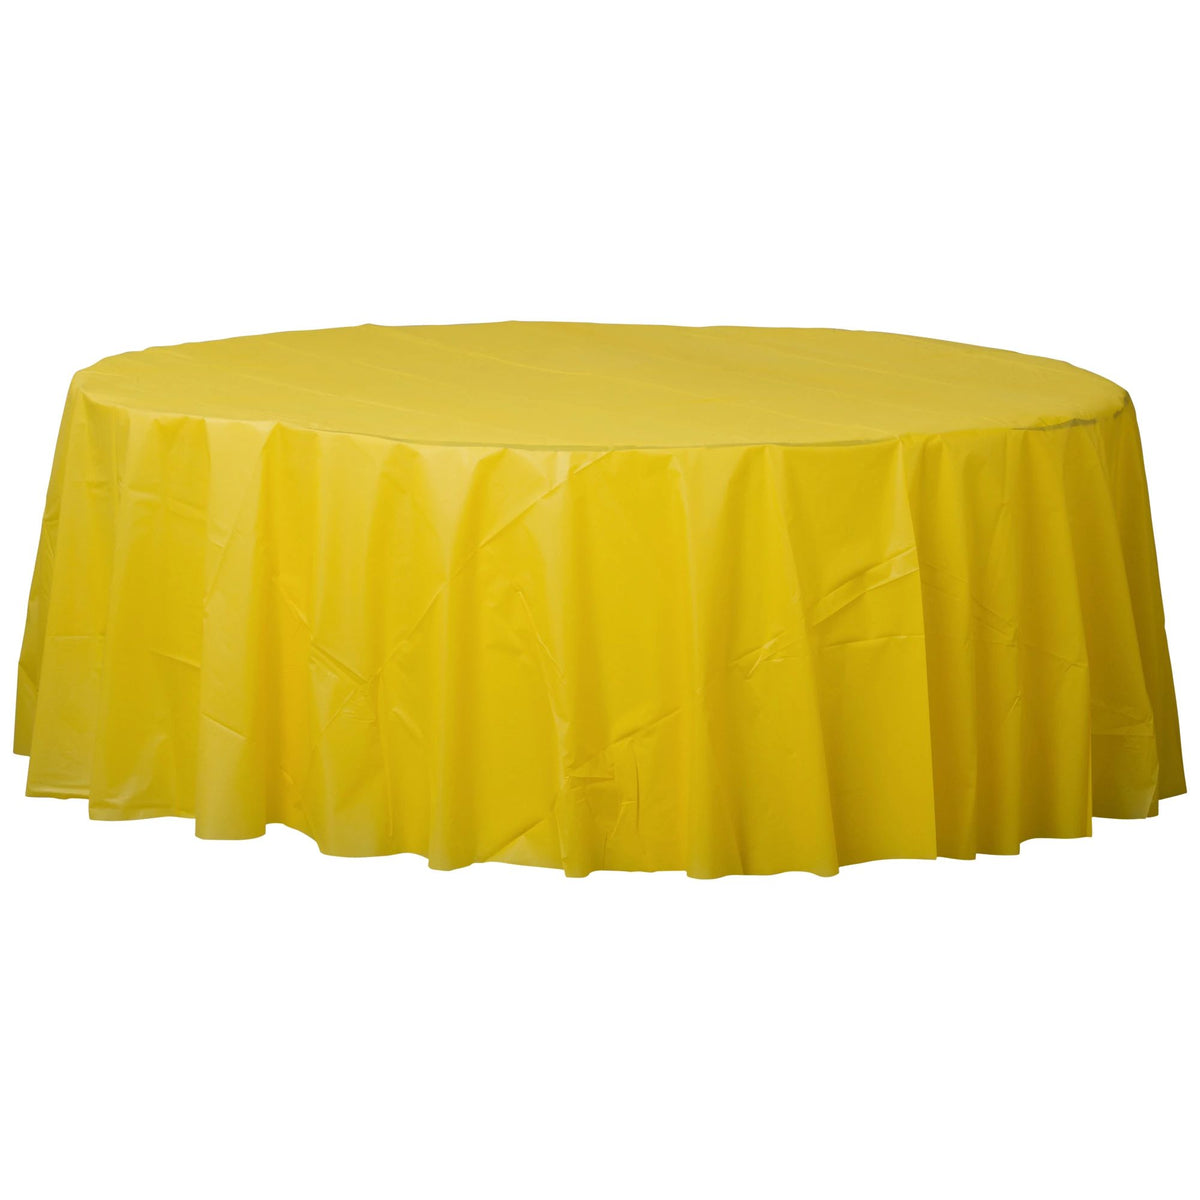 Yellow 84" Round Plastic Table Cover